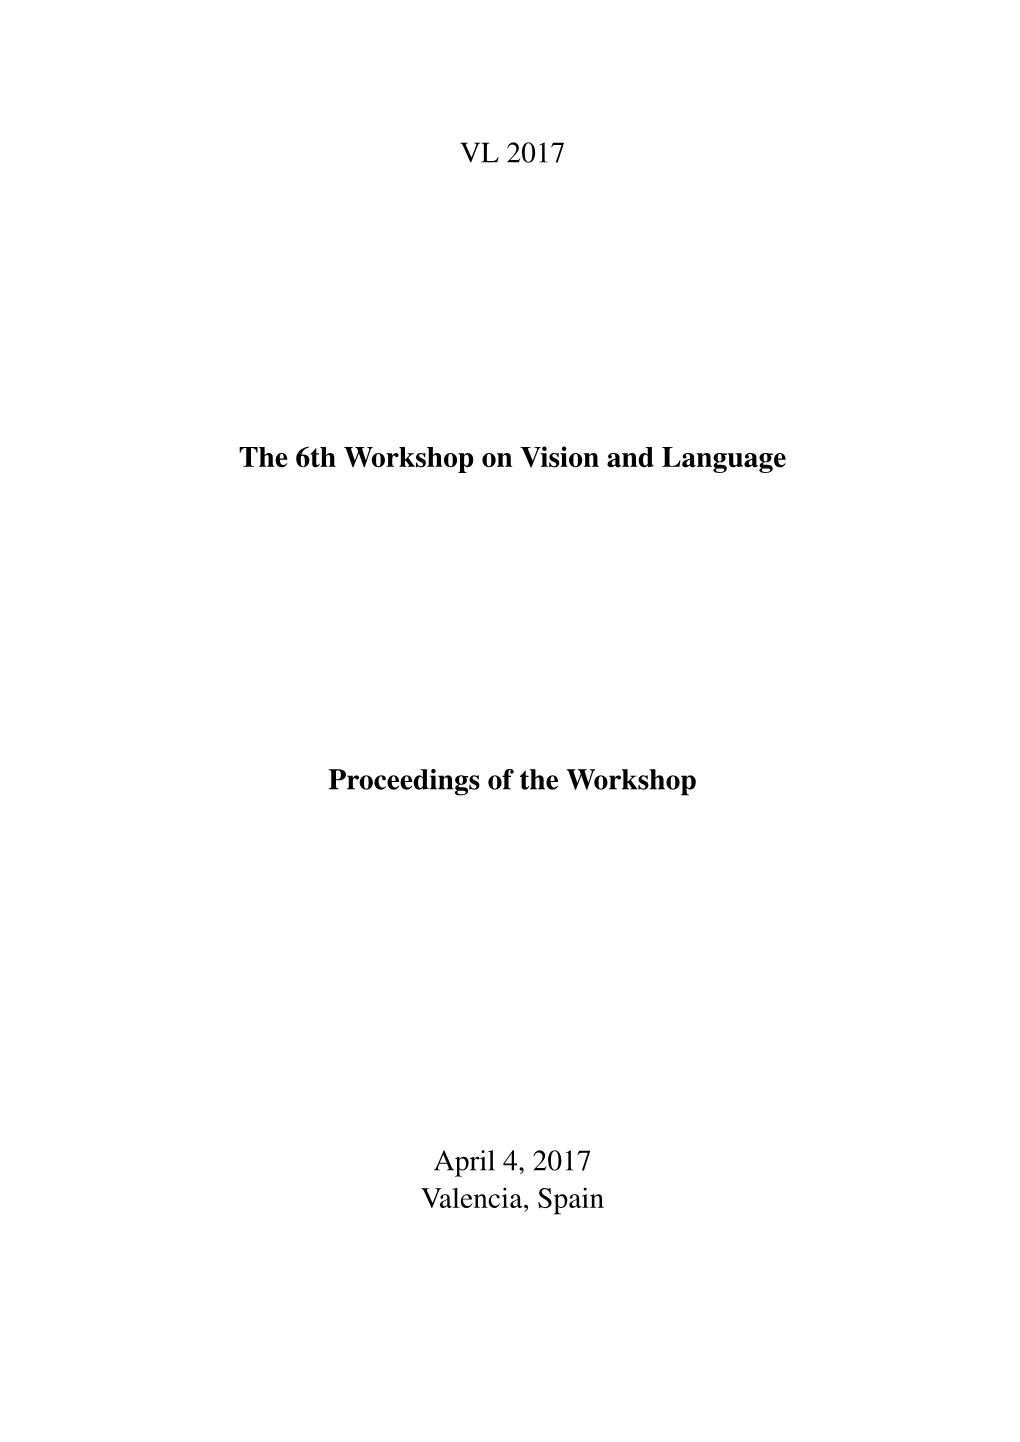 Proceedings of the 6Th Workshop on Vision and Language, Pages 1–10, Valencia, Spain, April 4, 2017